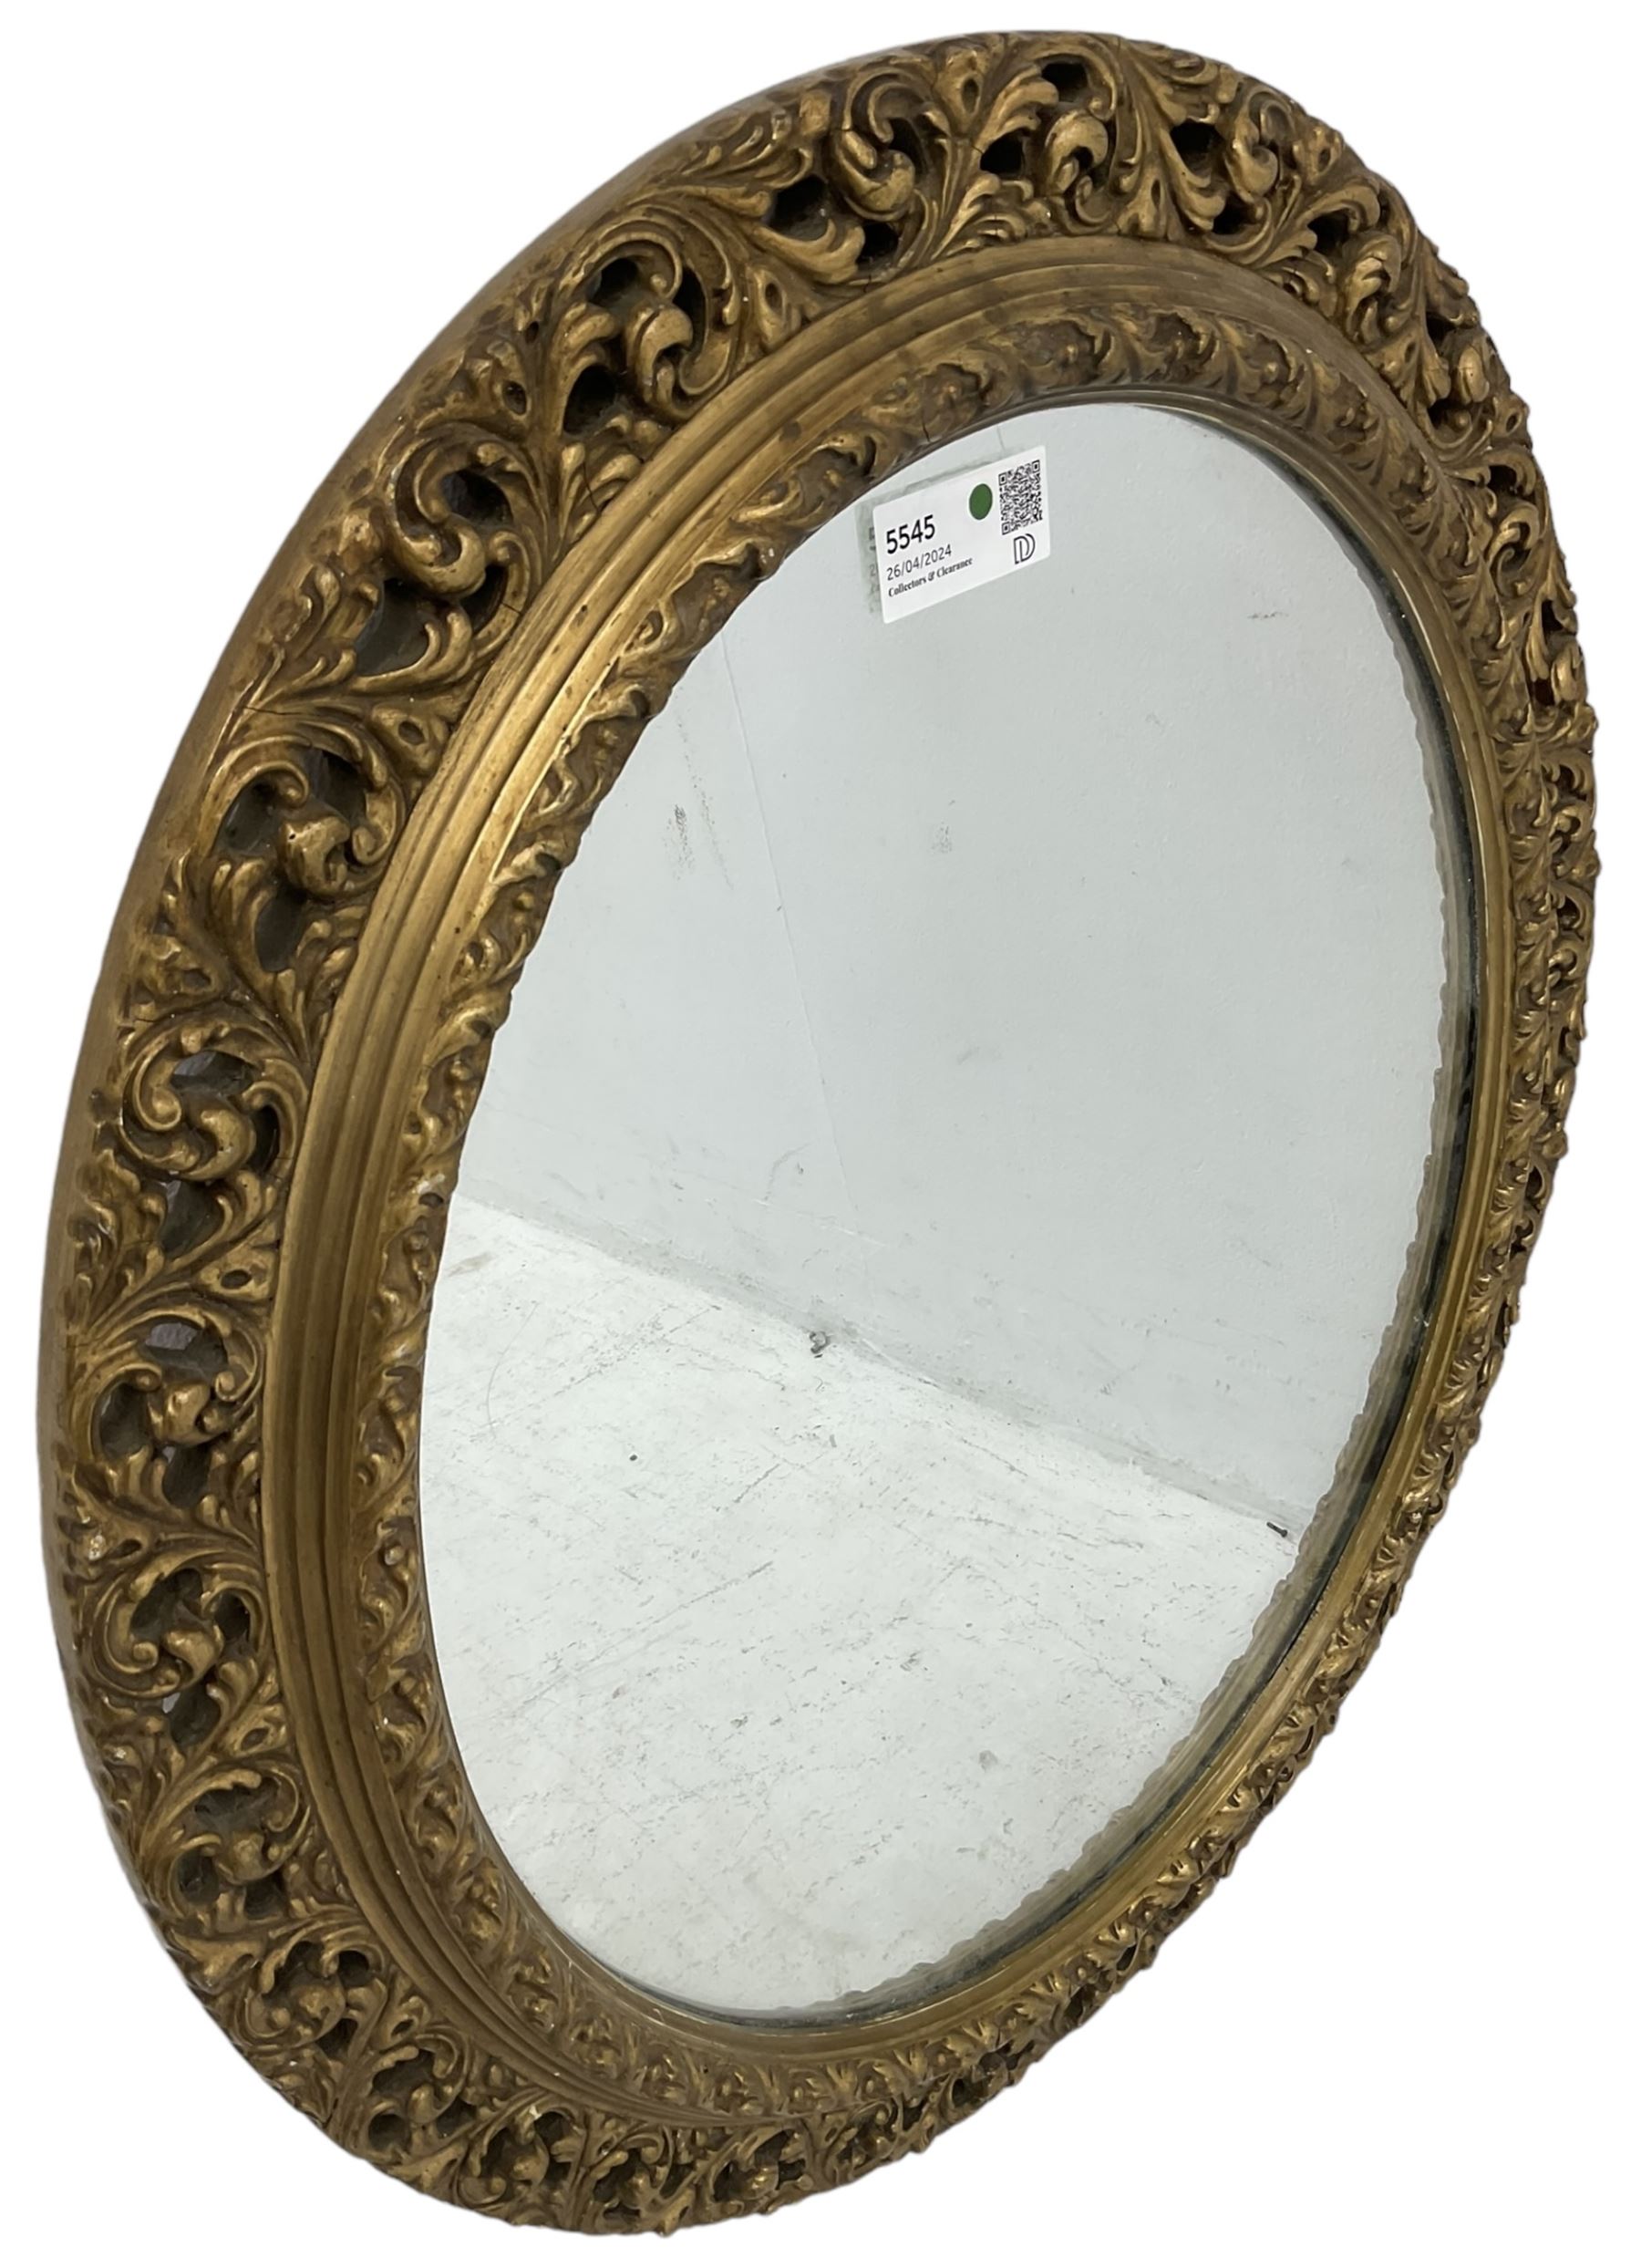 Mid-20th century gilt wood and gesso wall mirror - Image 2 of 4